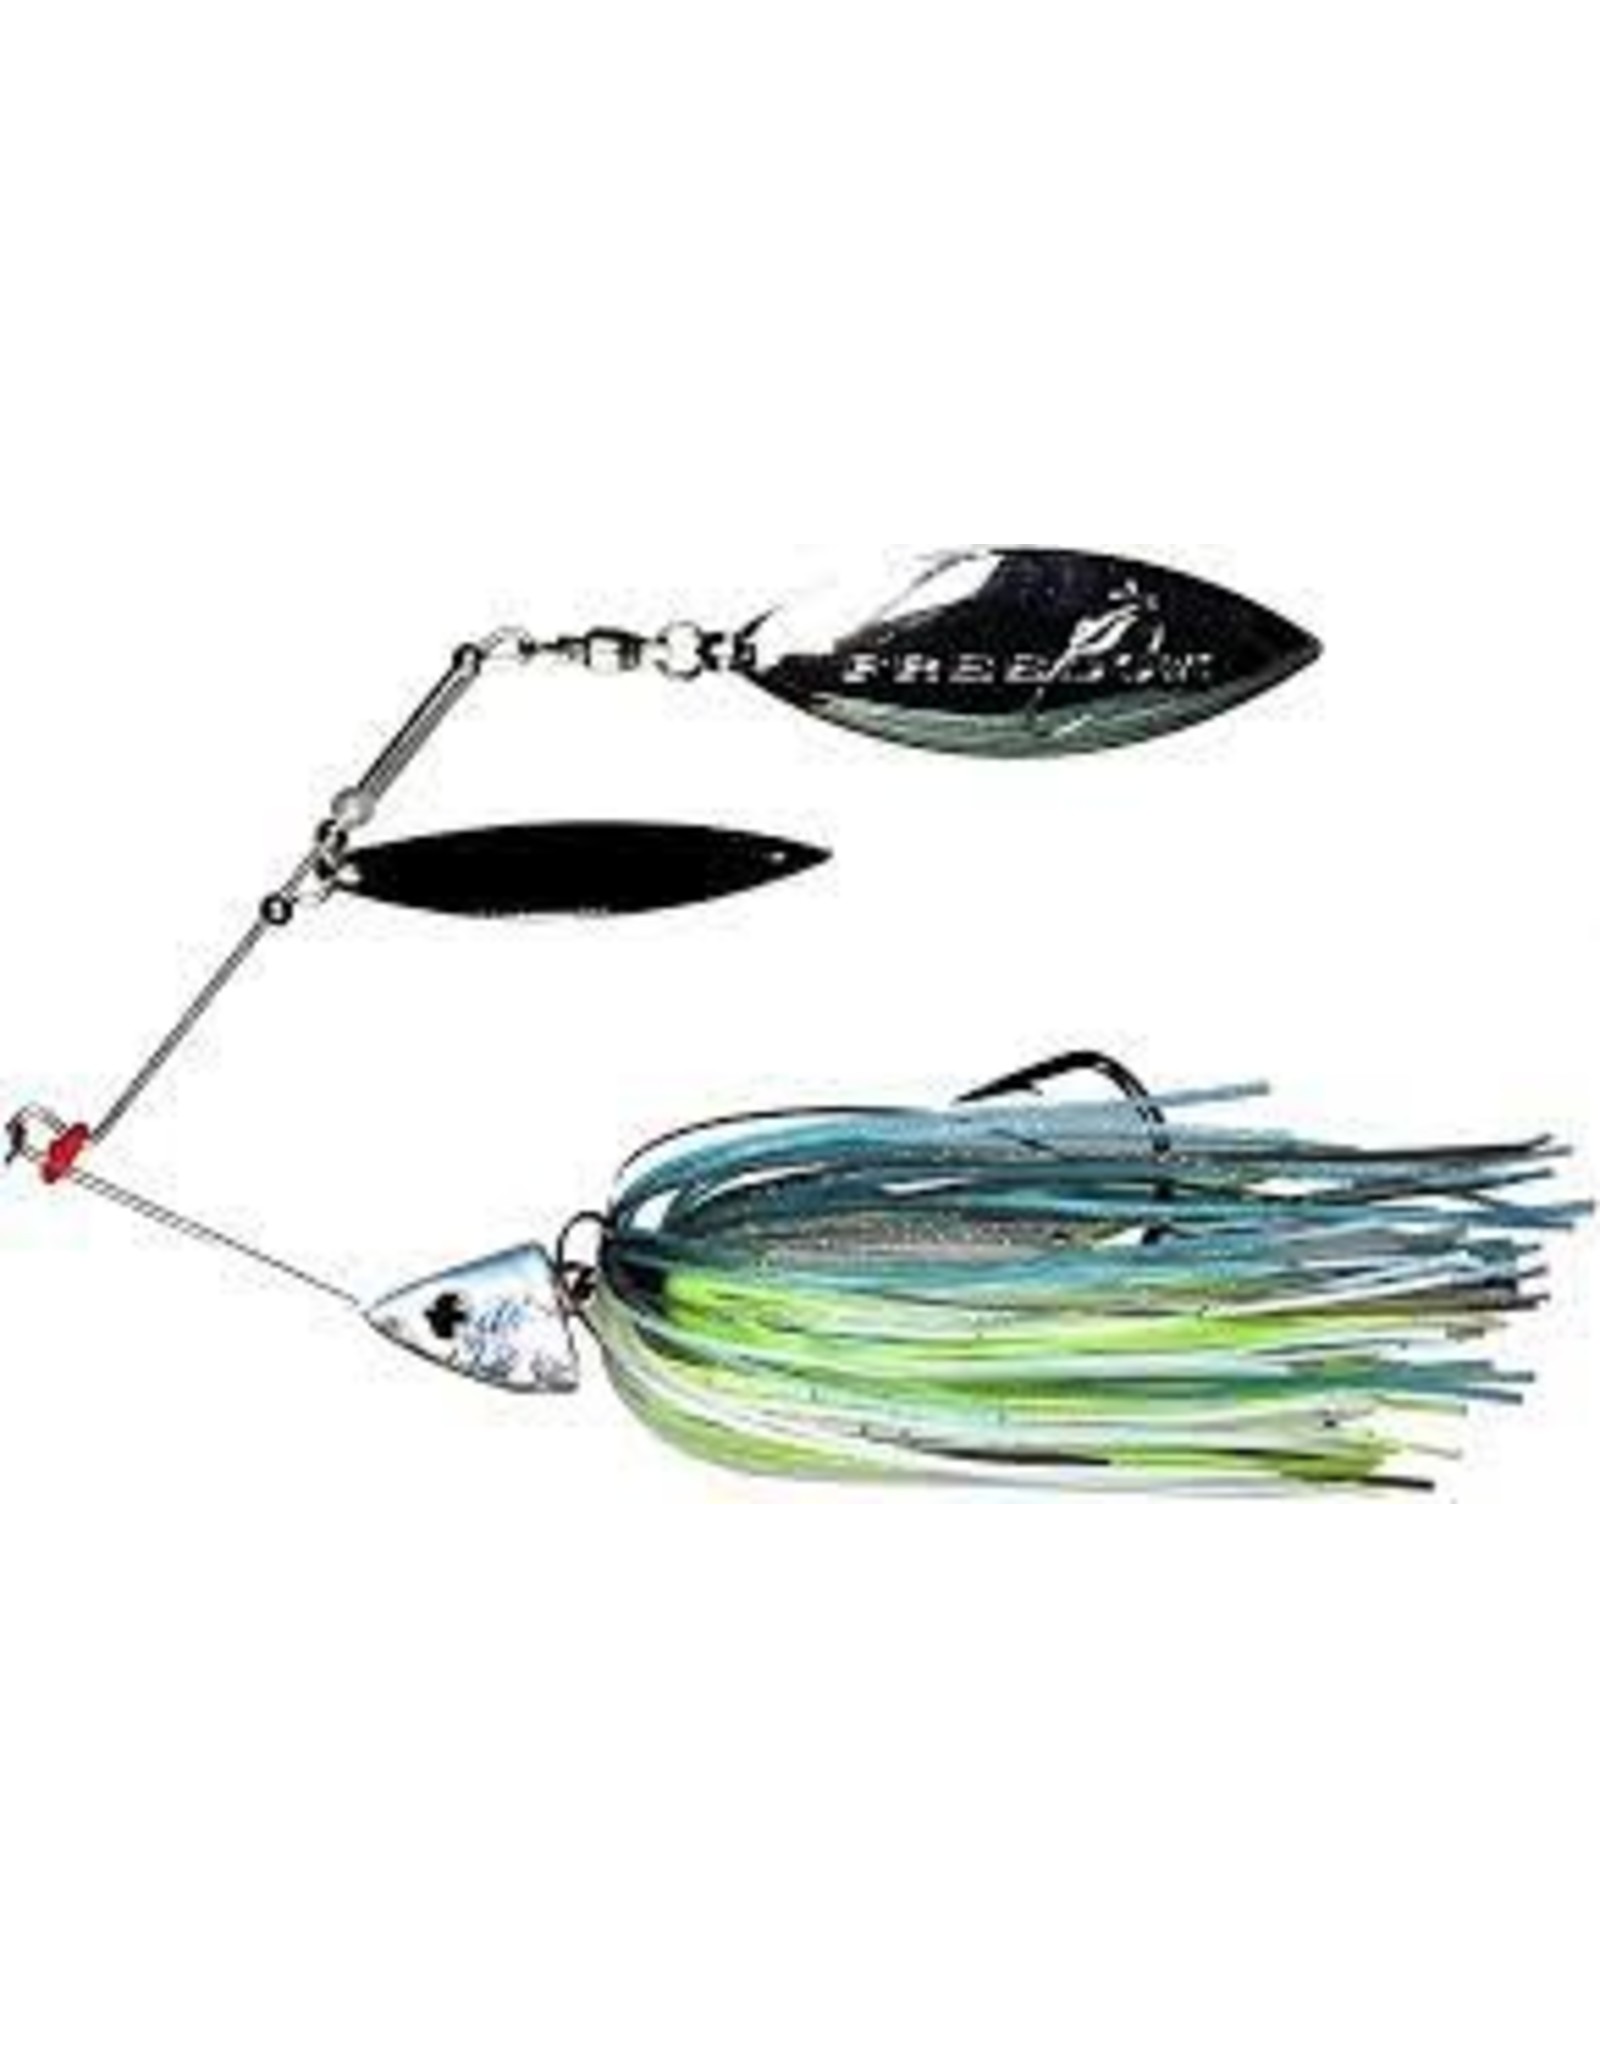 Freedom Freedom Tackle - Spinnerbait Double Willow - Blue Shad 3/4 oz